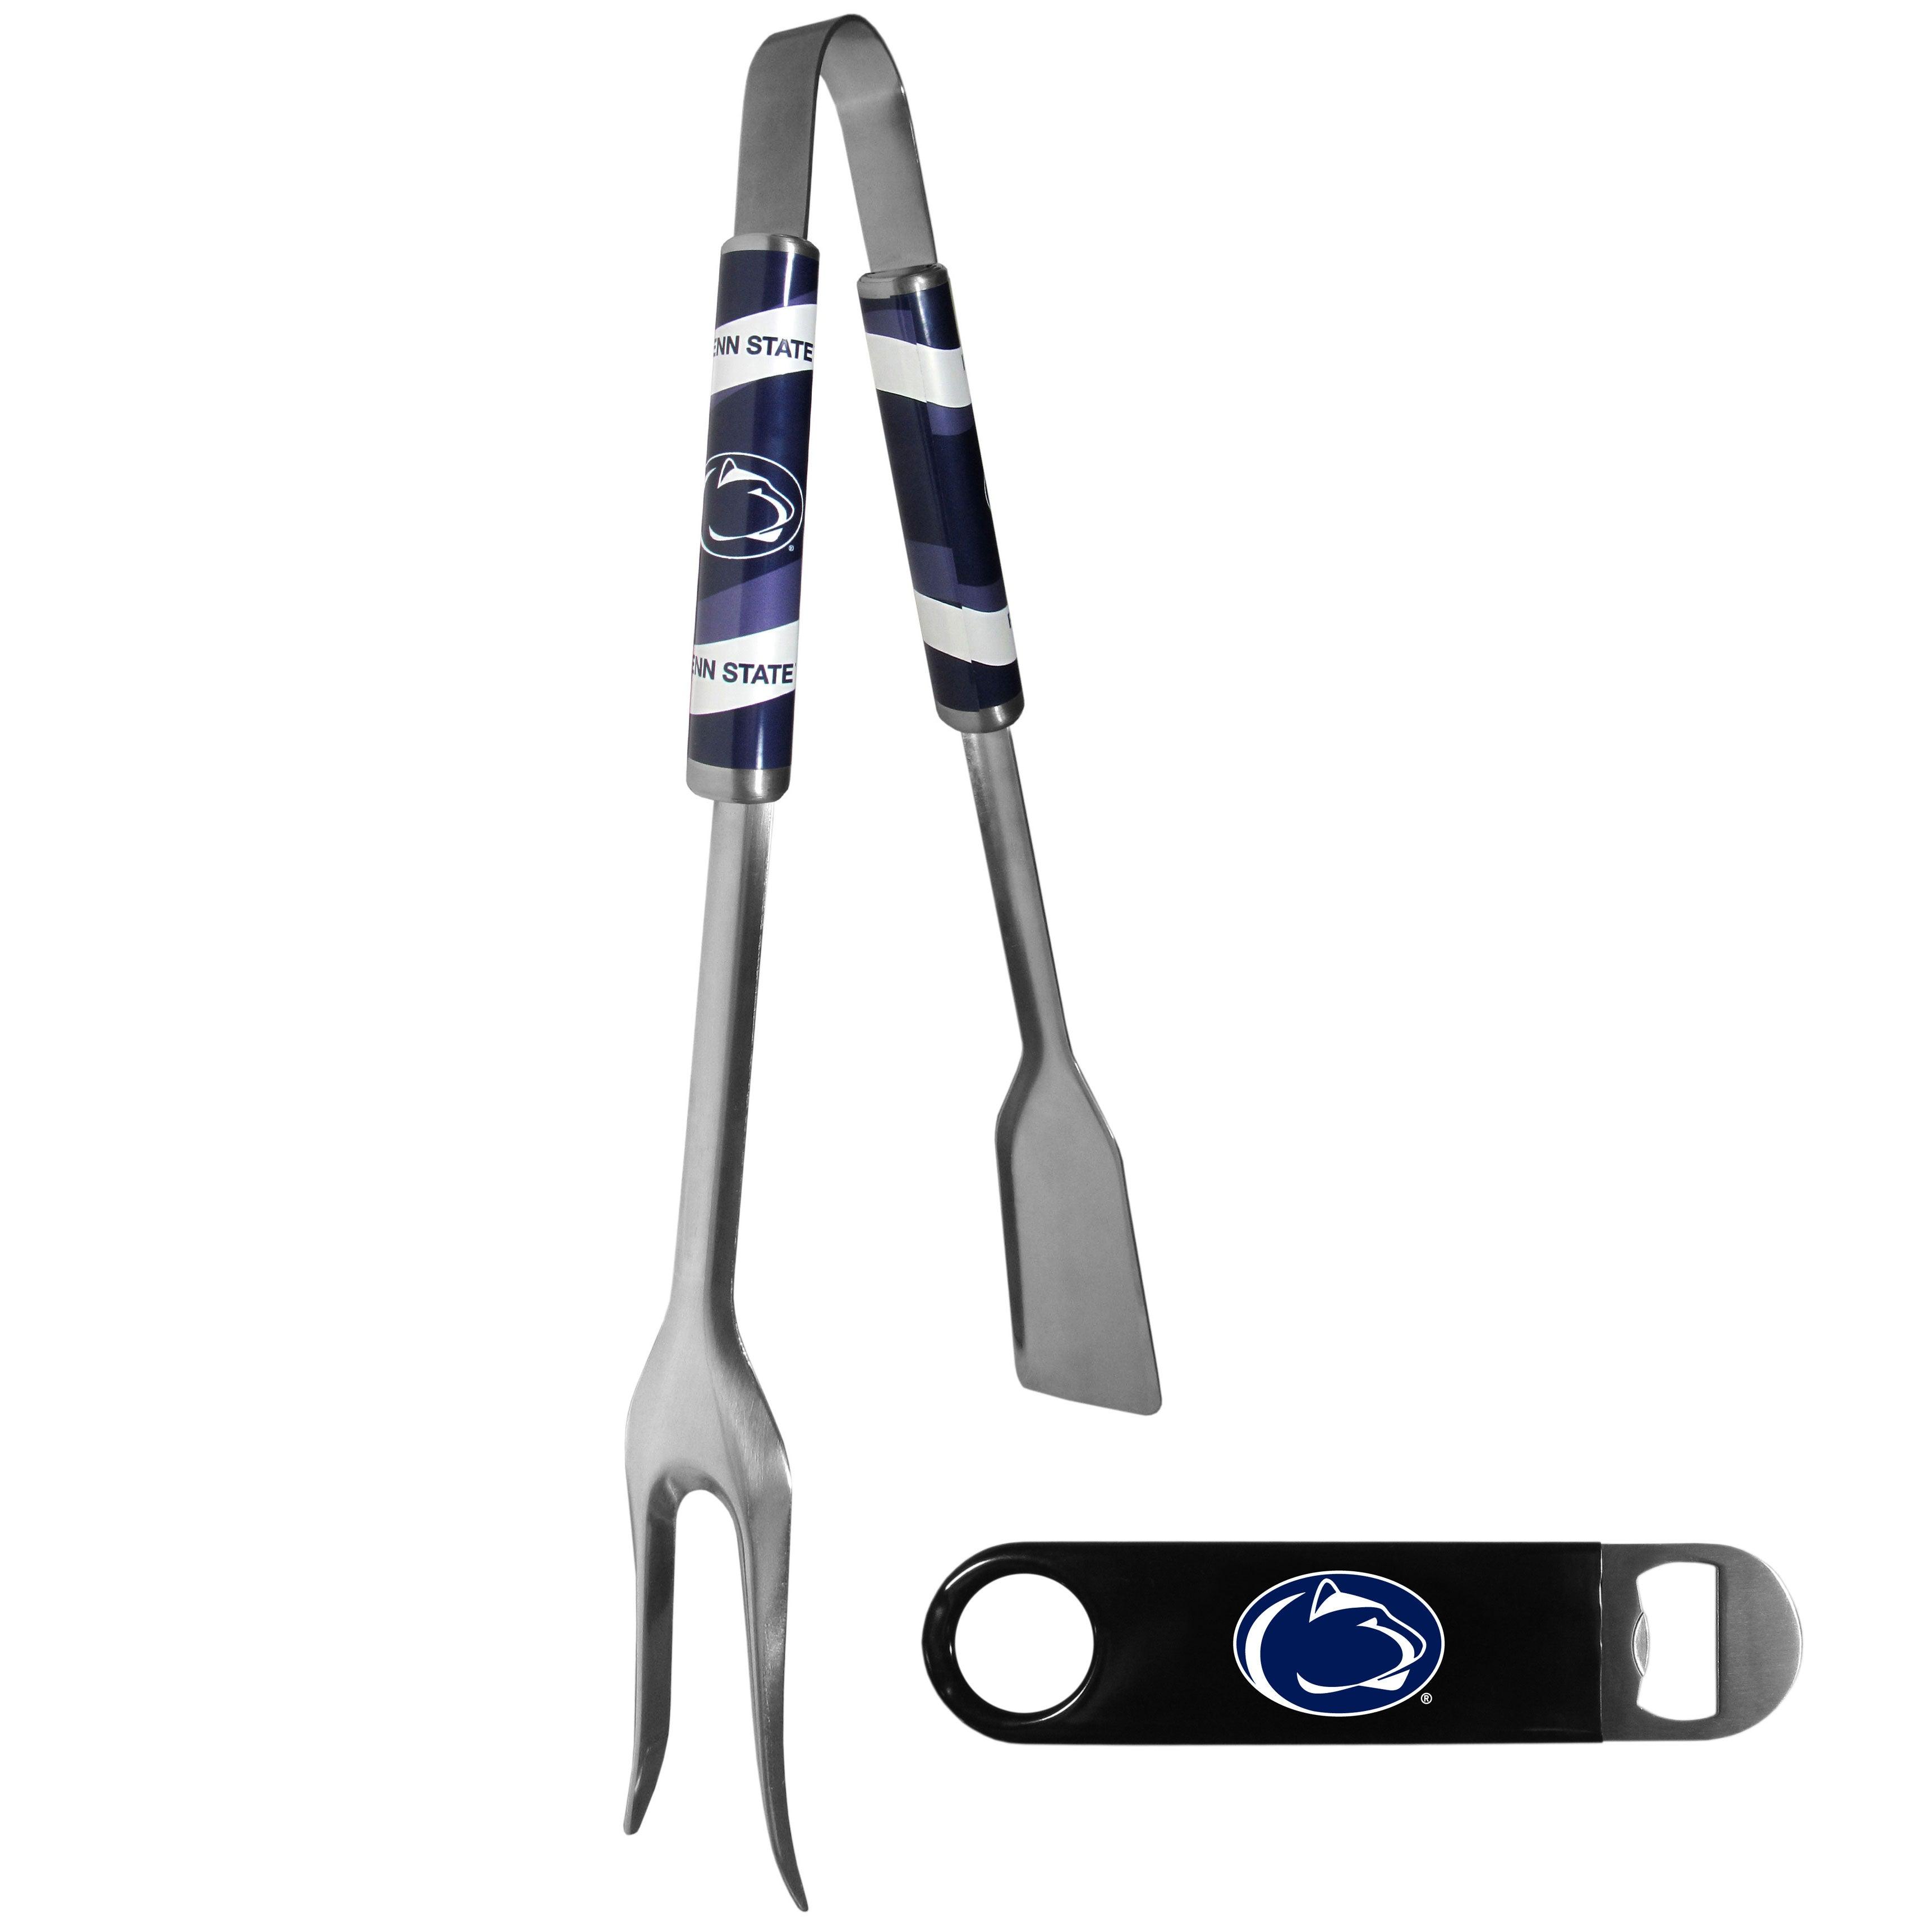 Penn St. Nittany Lions 3 in 1 BBQ Tool and Bottle Opener - Flyclothing LLC